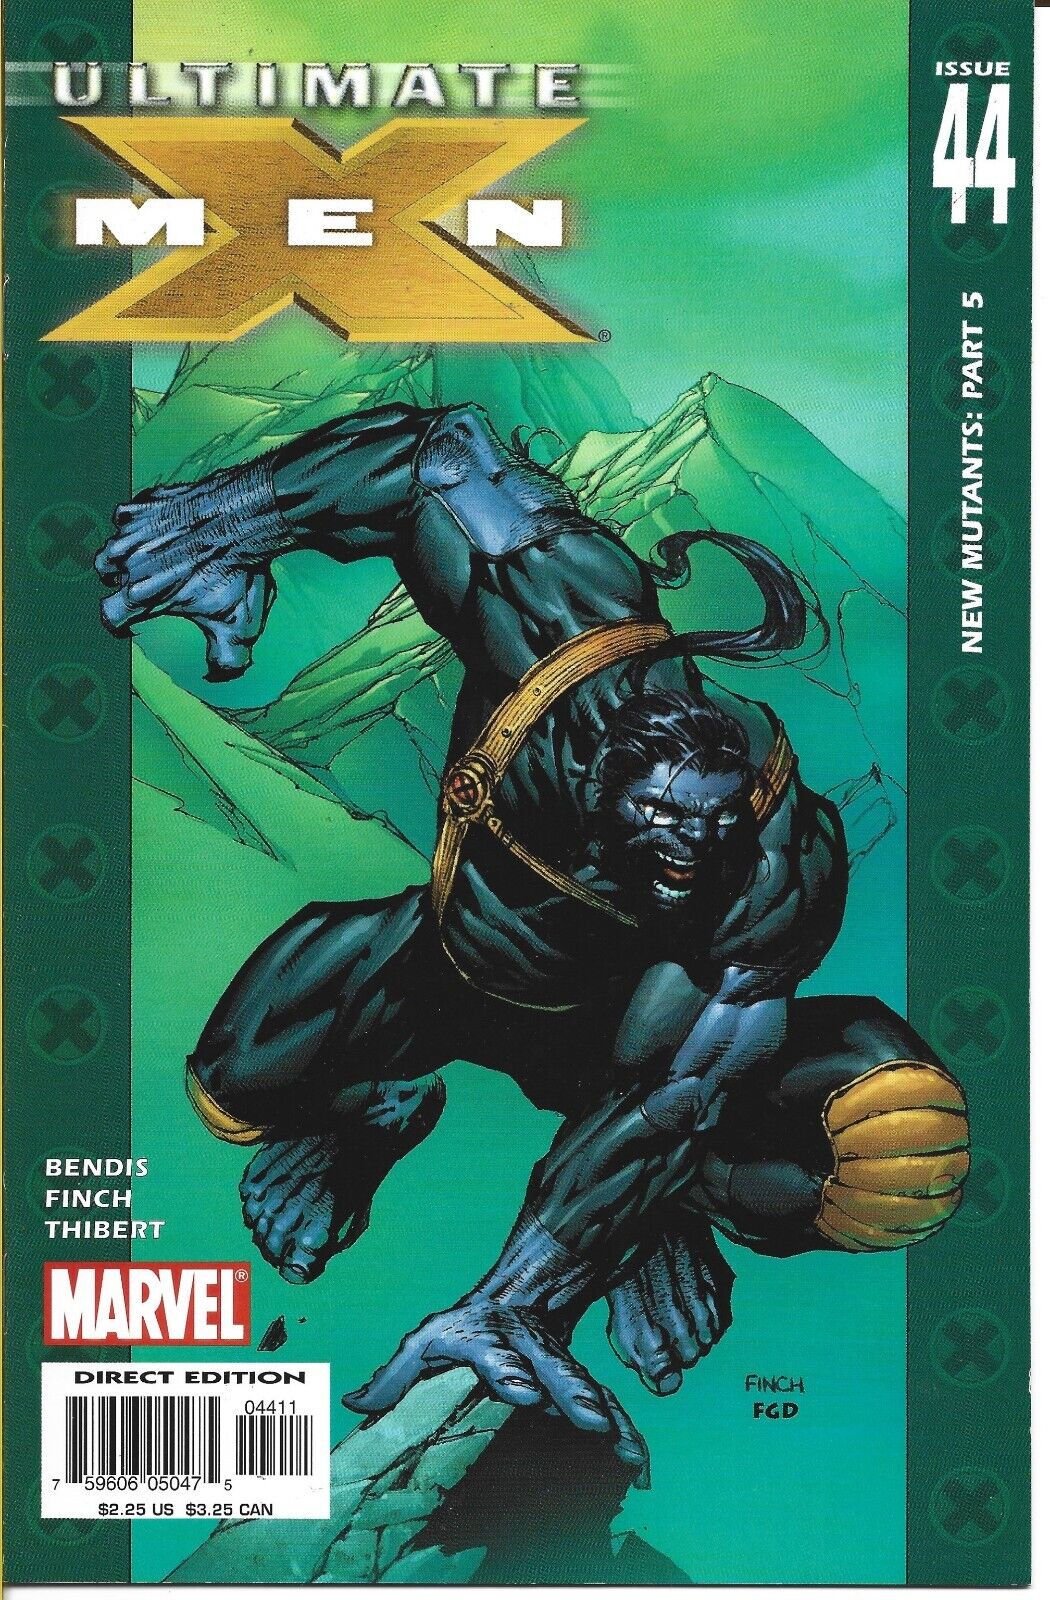 ULTIMATE X-MEN #44 MARVEL COMICS 2004 BAGGED AND BOARDED